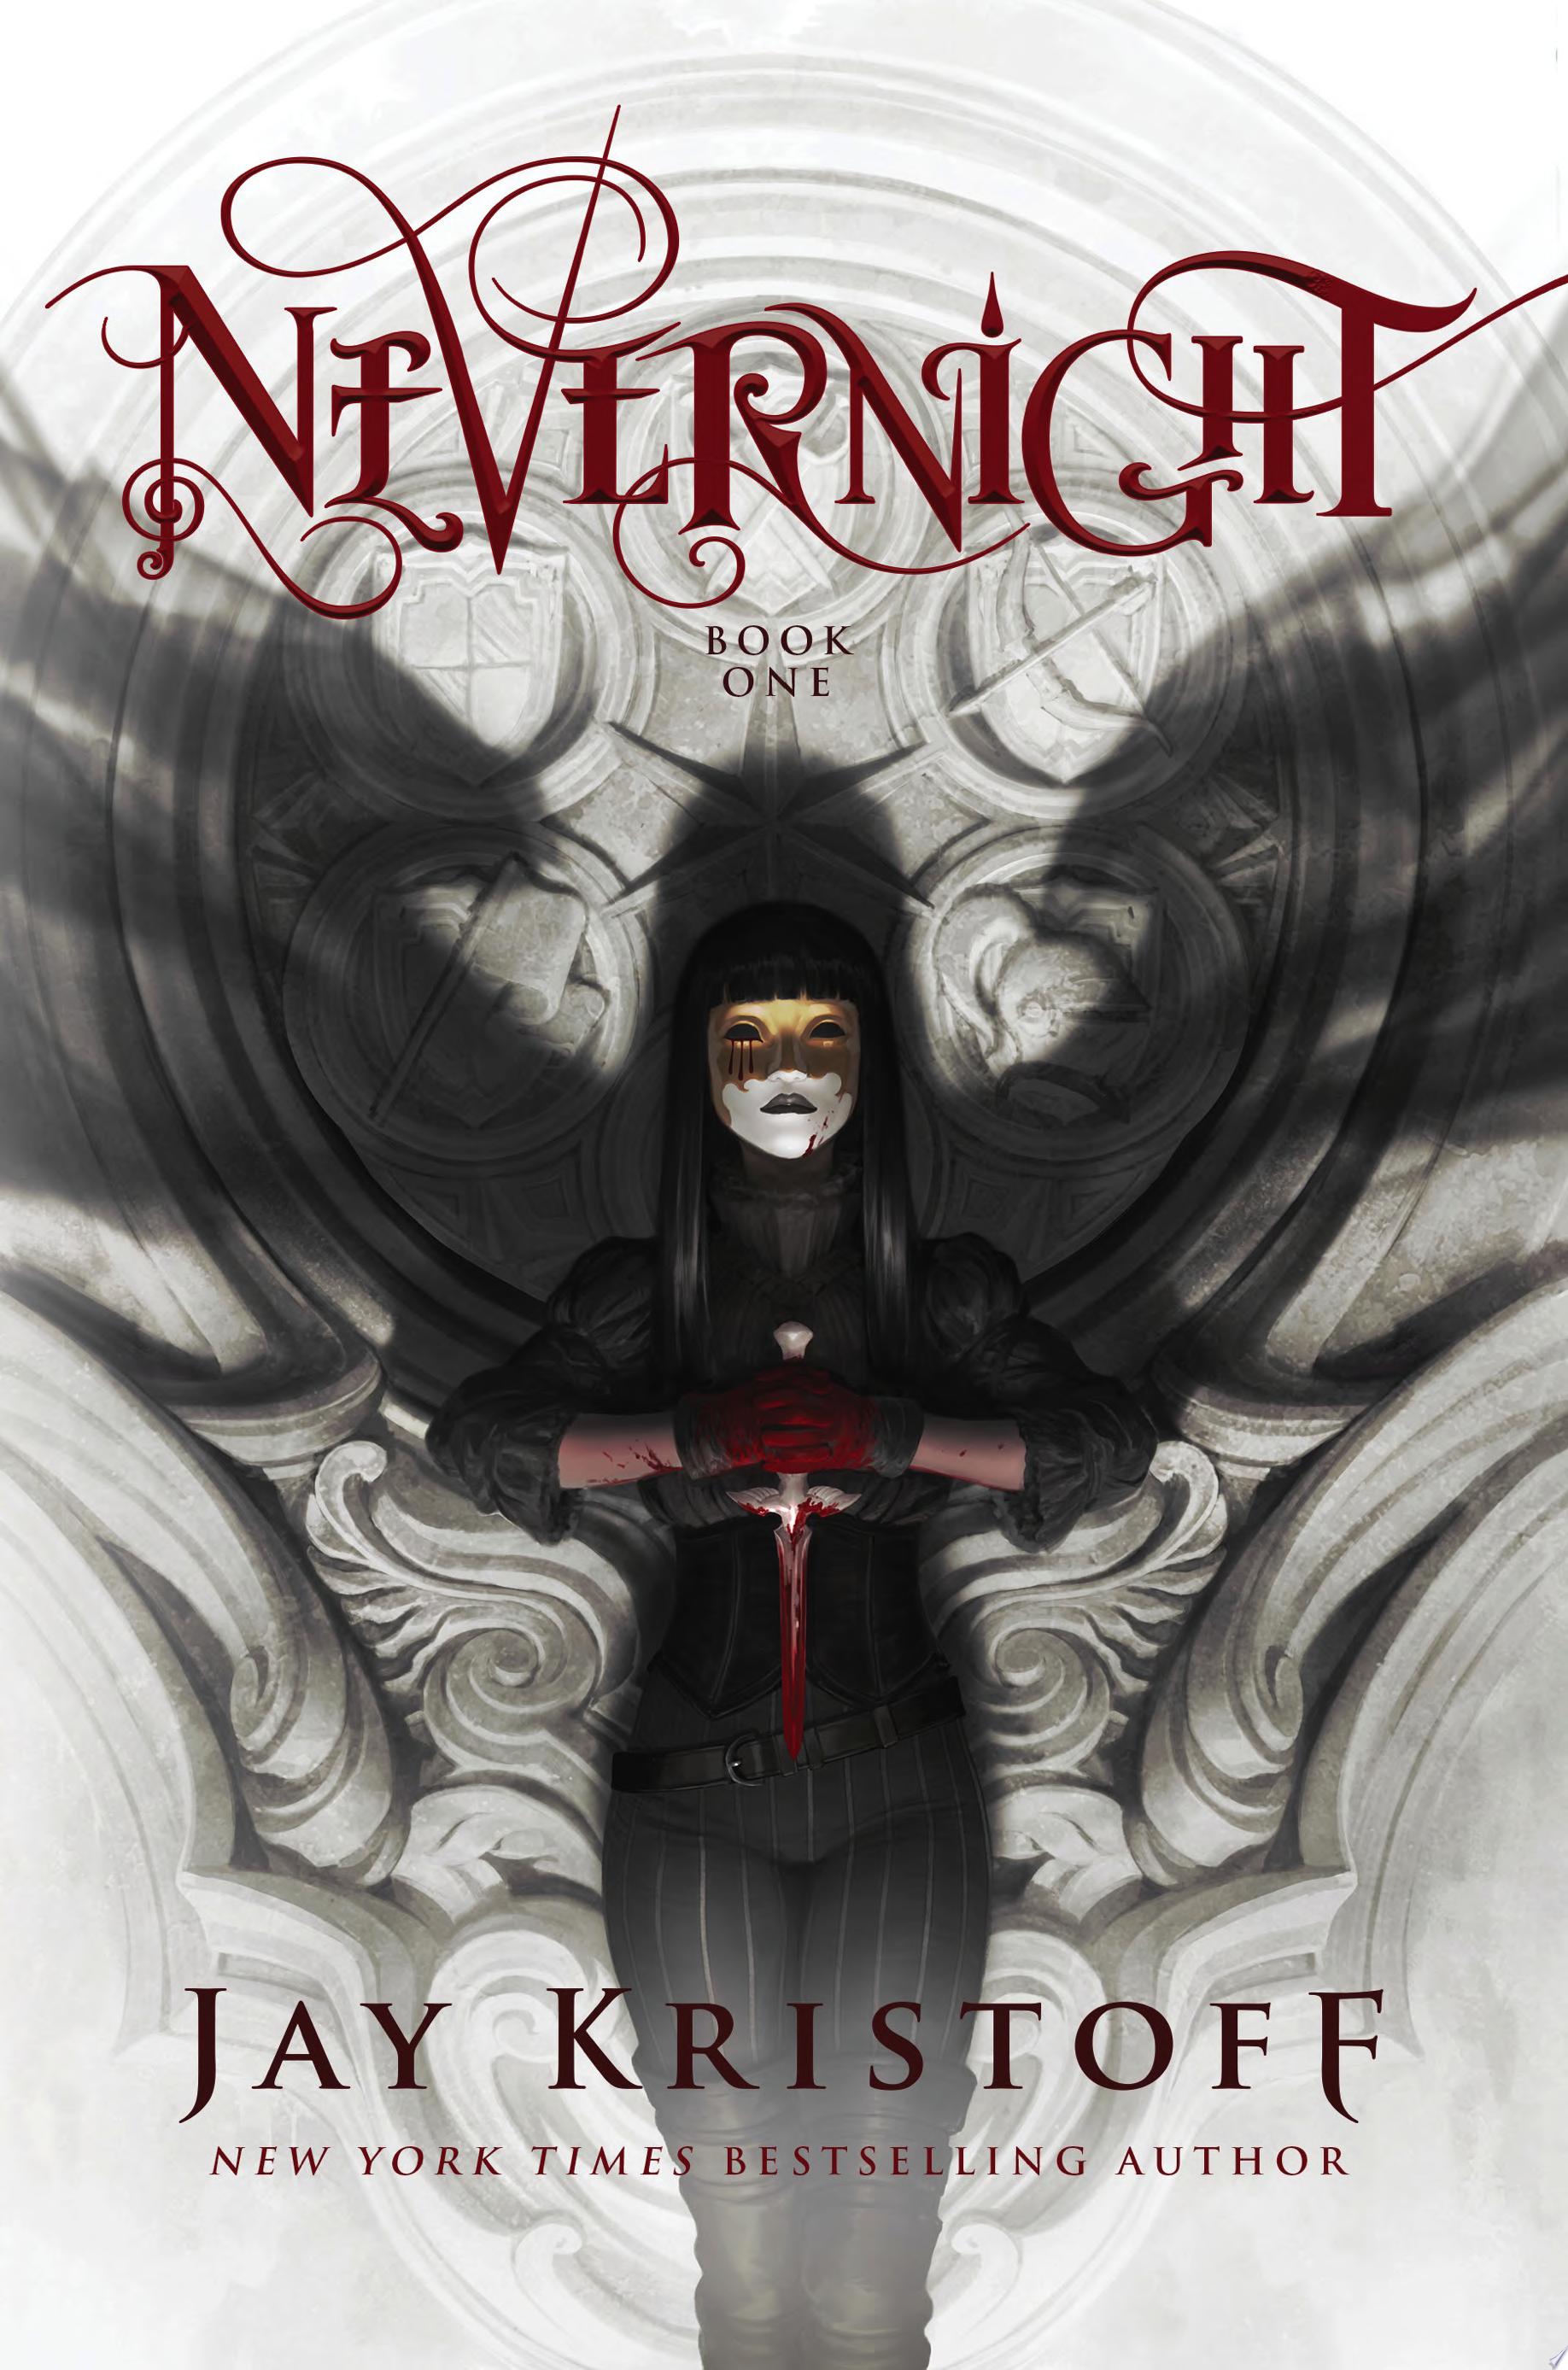 Image for "Nevernight"